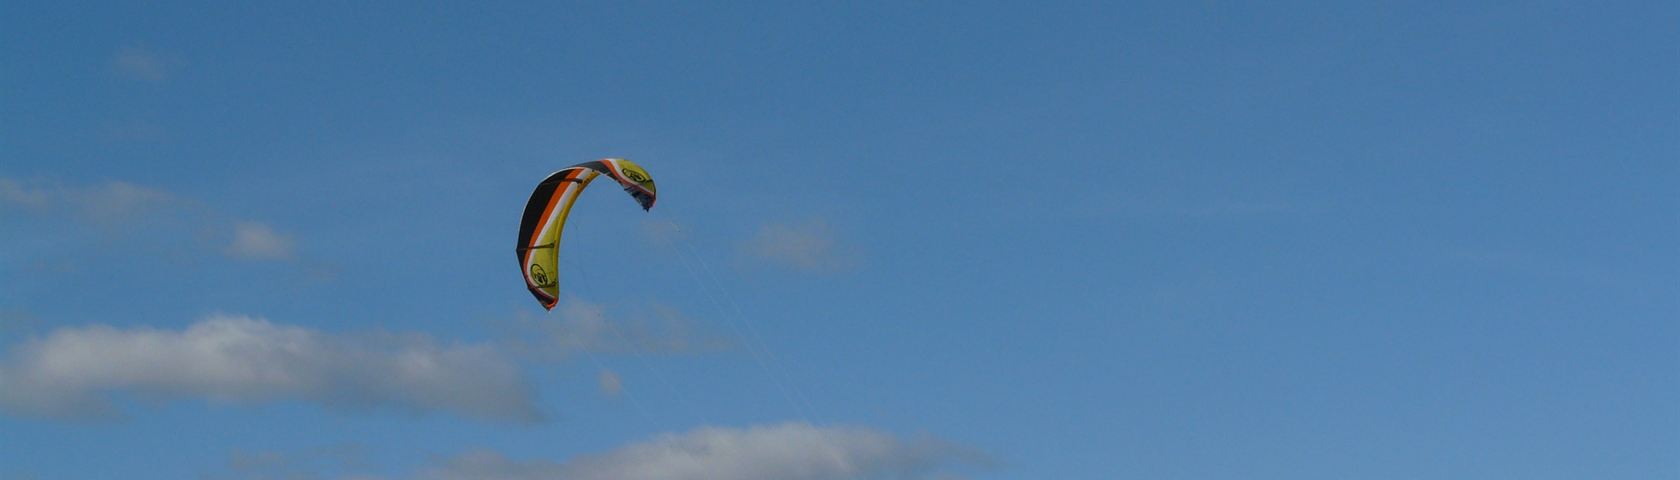 Beauduc and the Kite Surfer